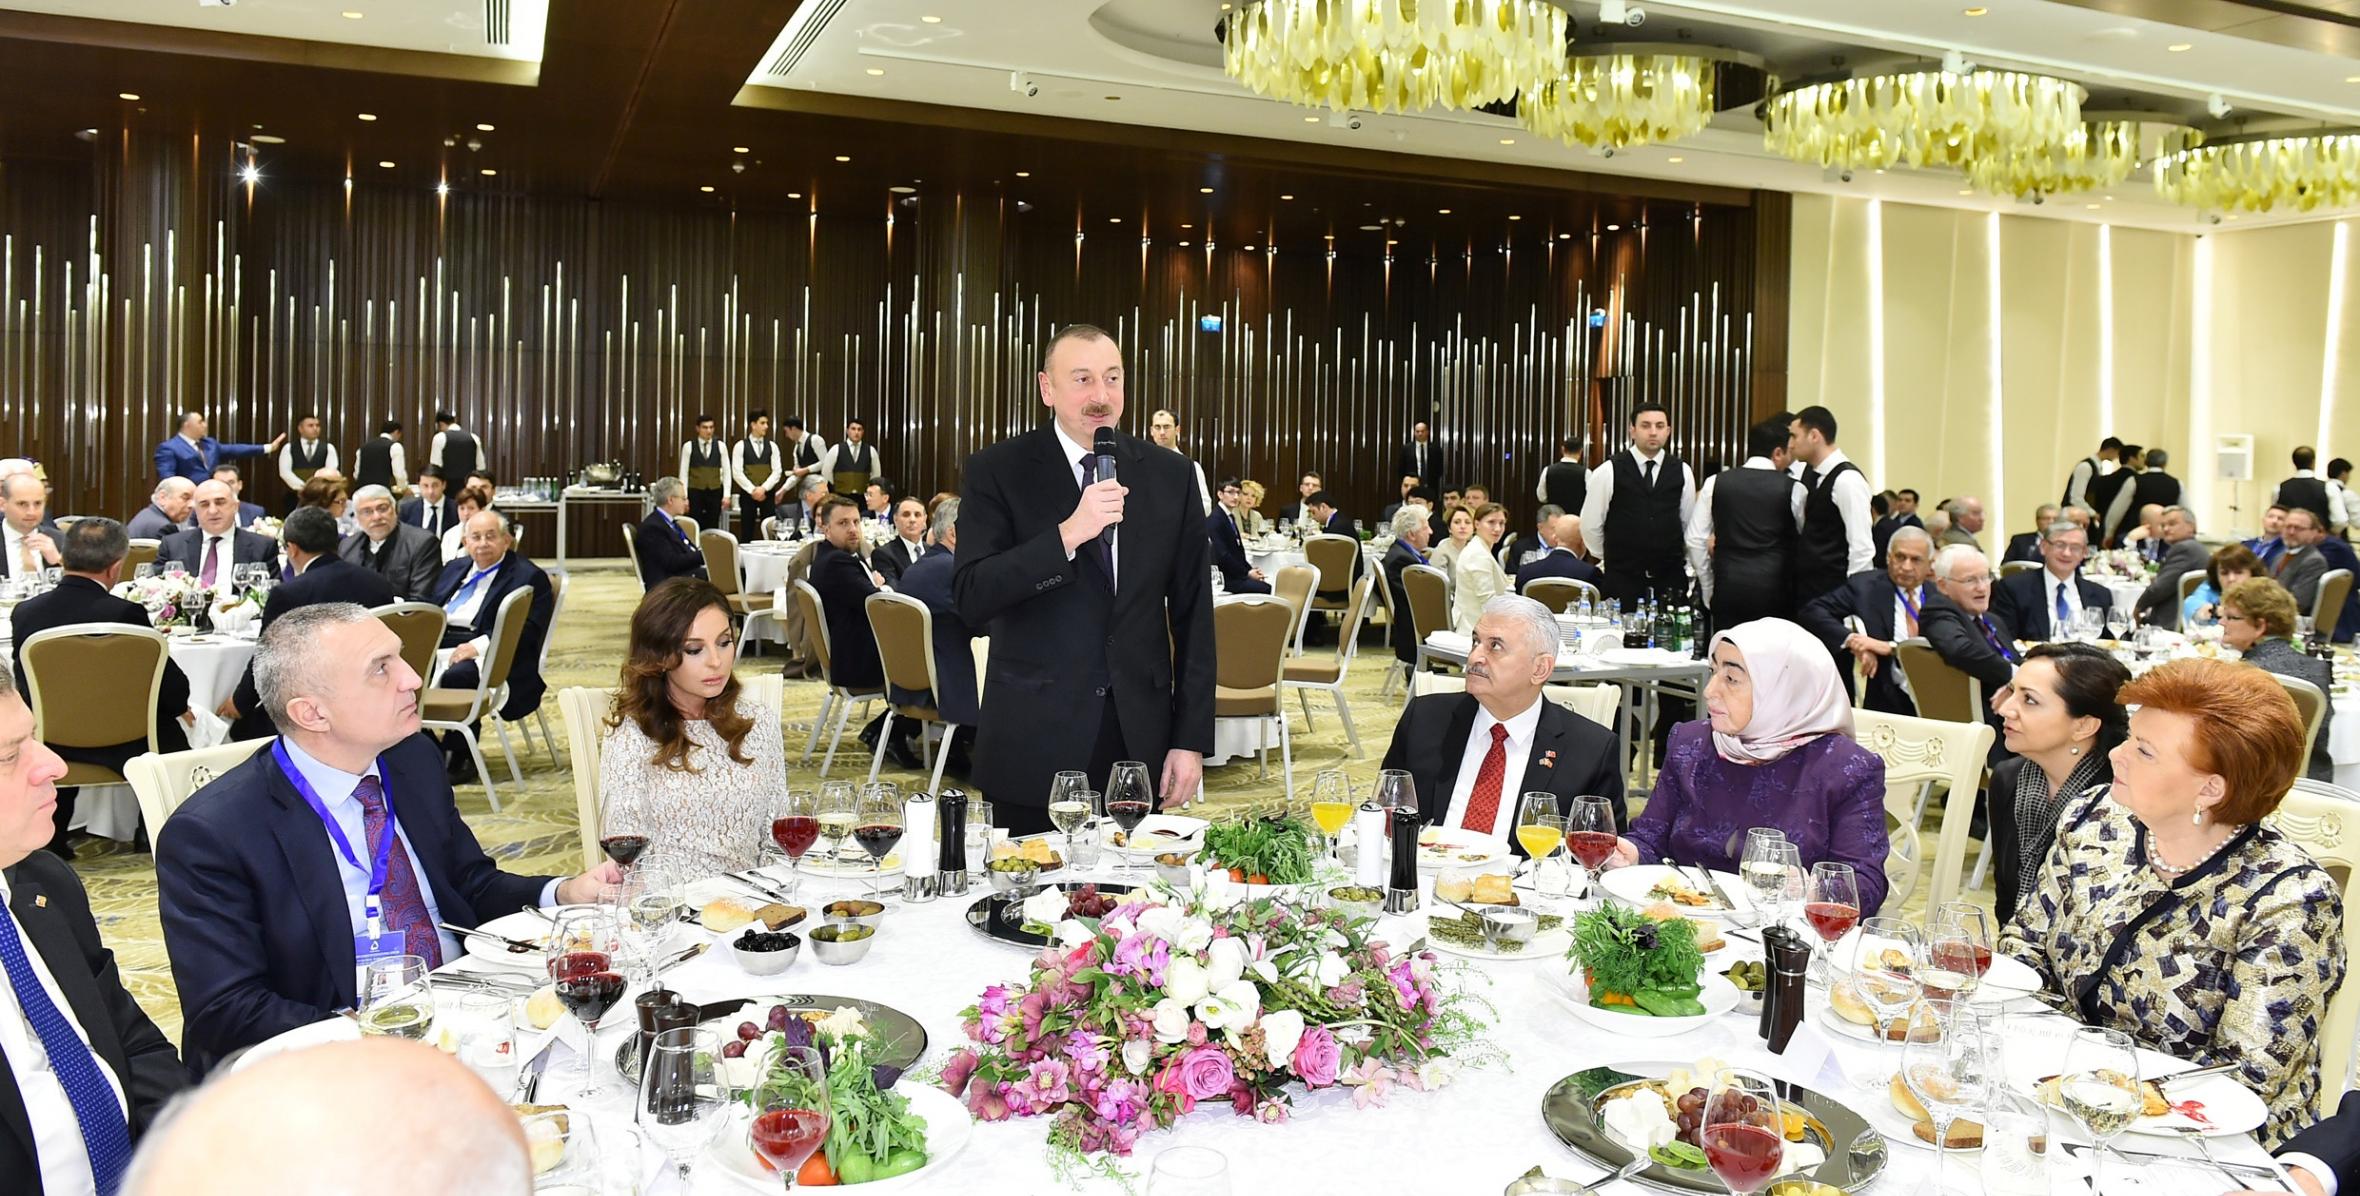 Reception was hosted for participants of 6th Global Baku Forum